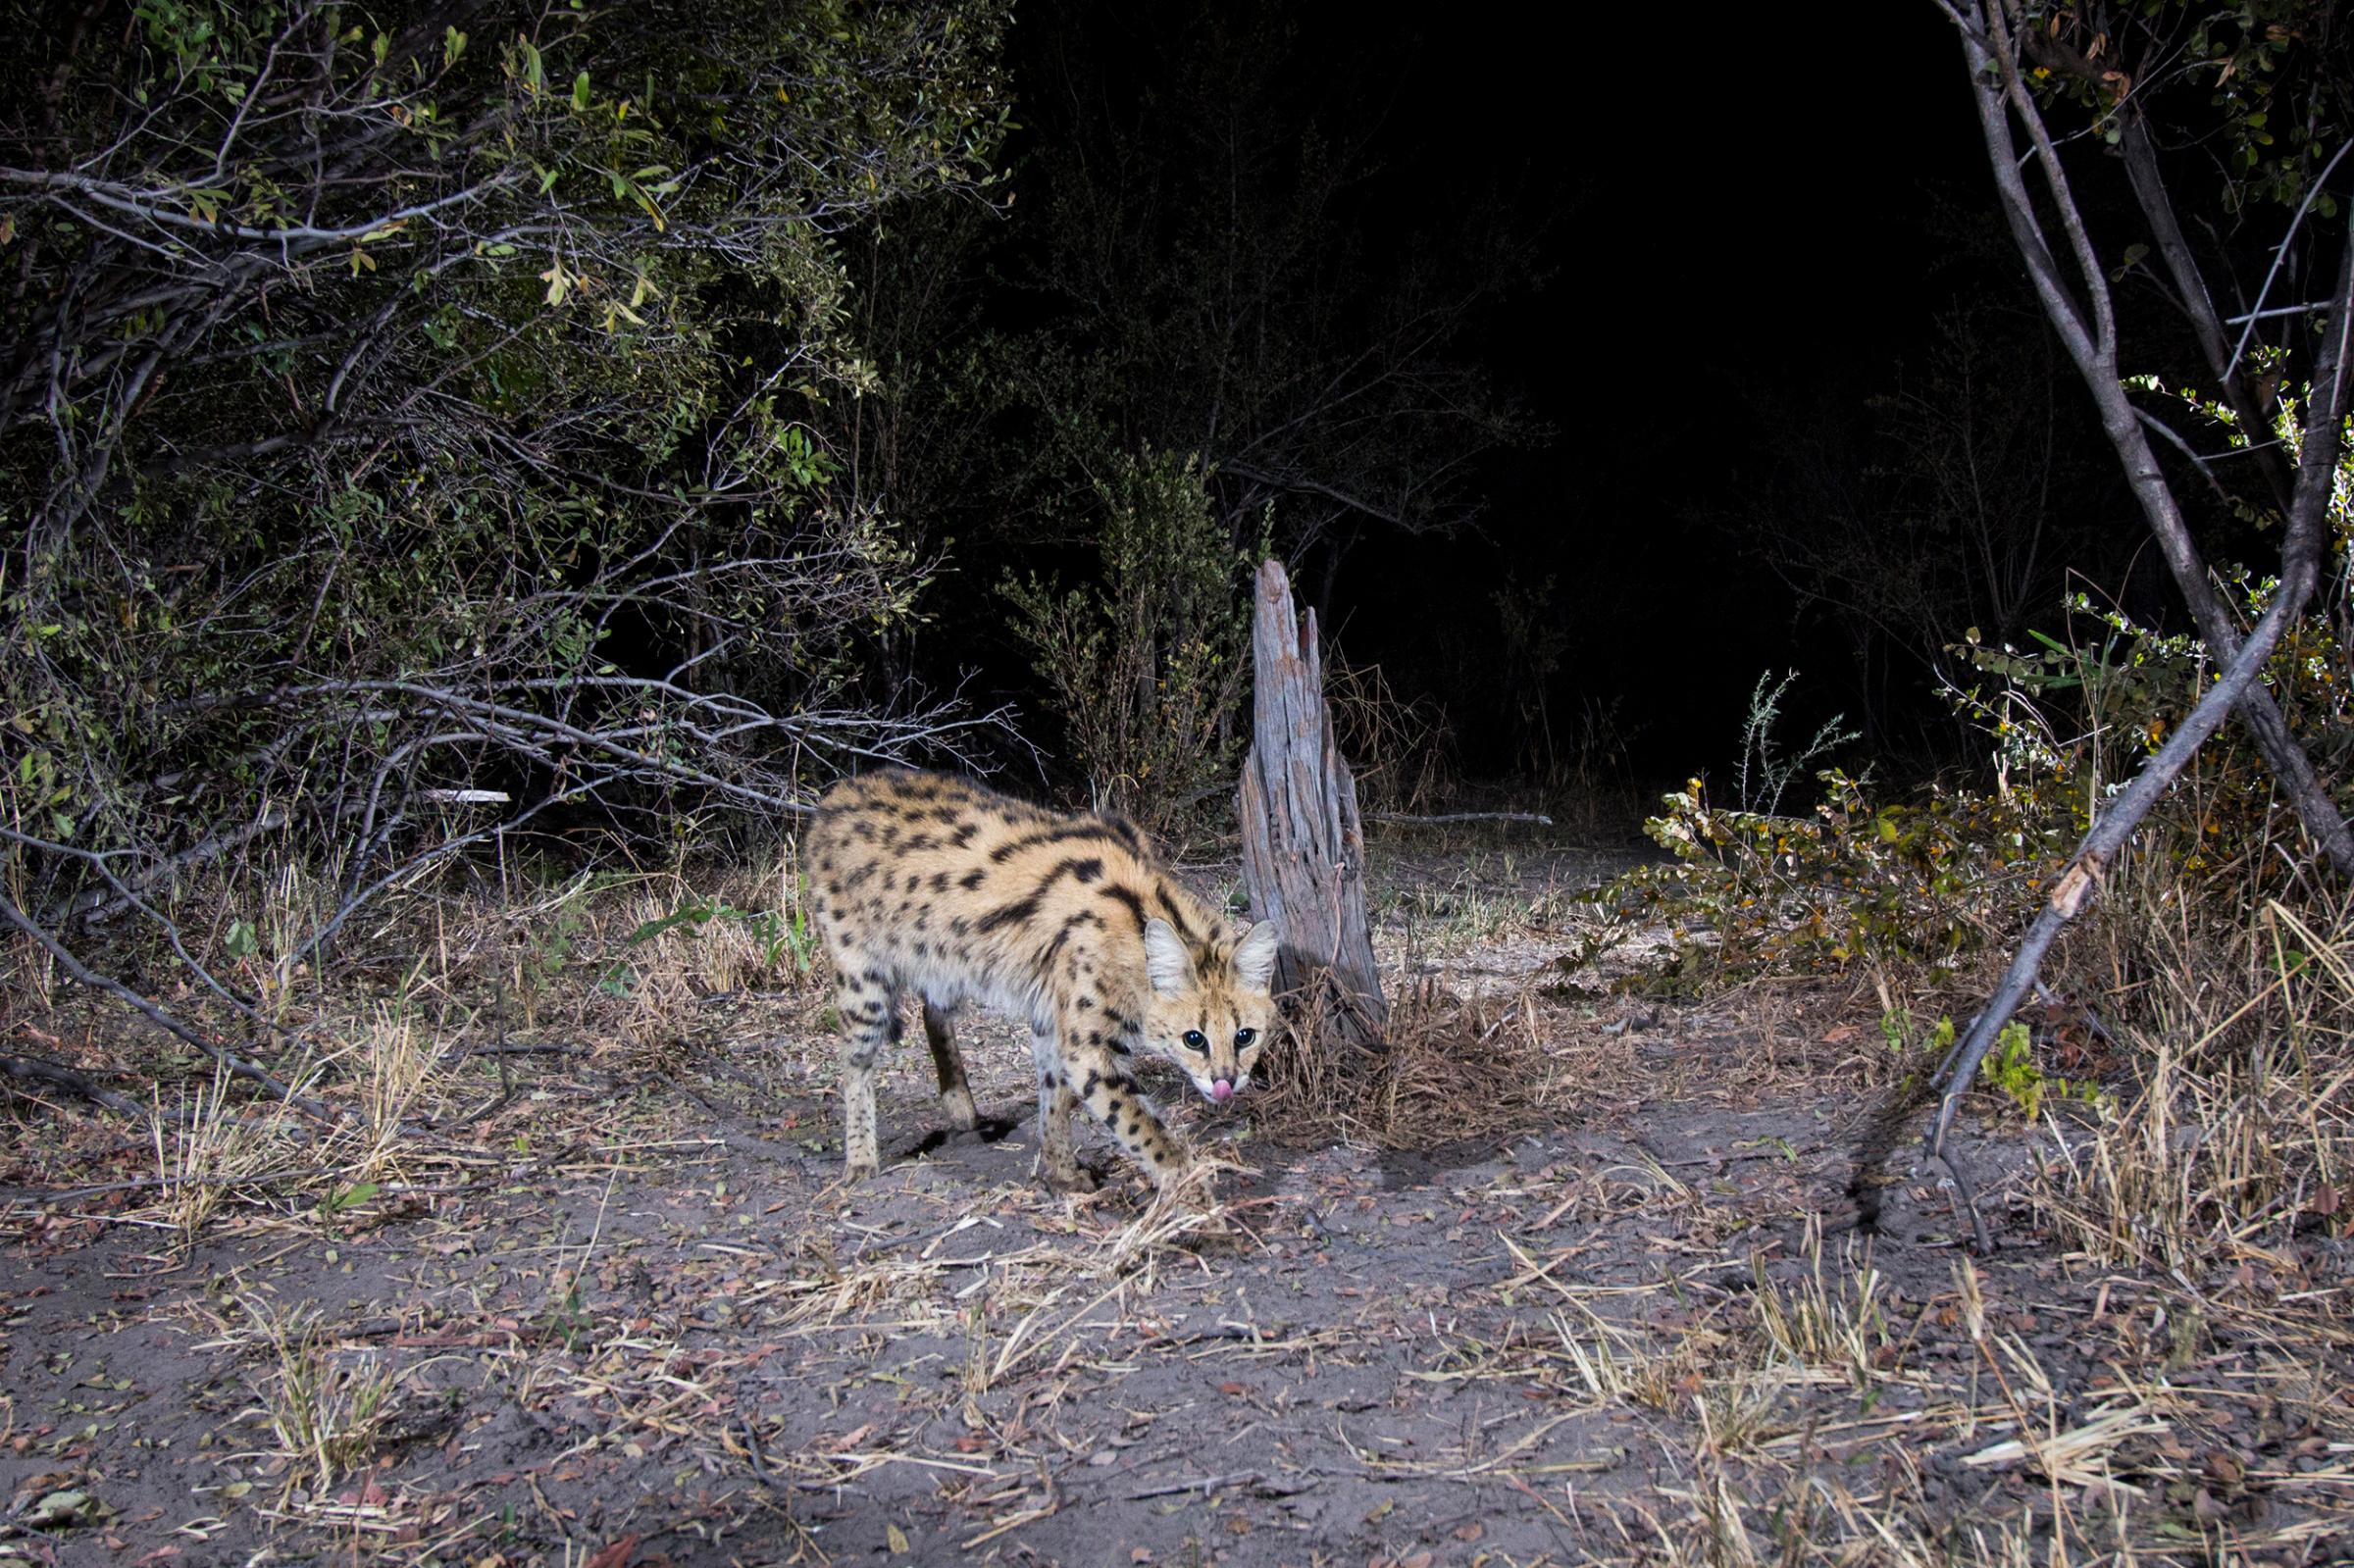 A camera trap image of a serval using Camtraptions PIR motion sensor.